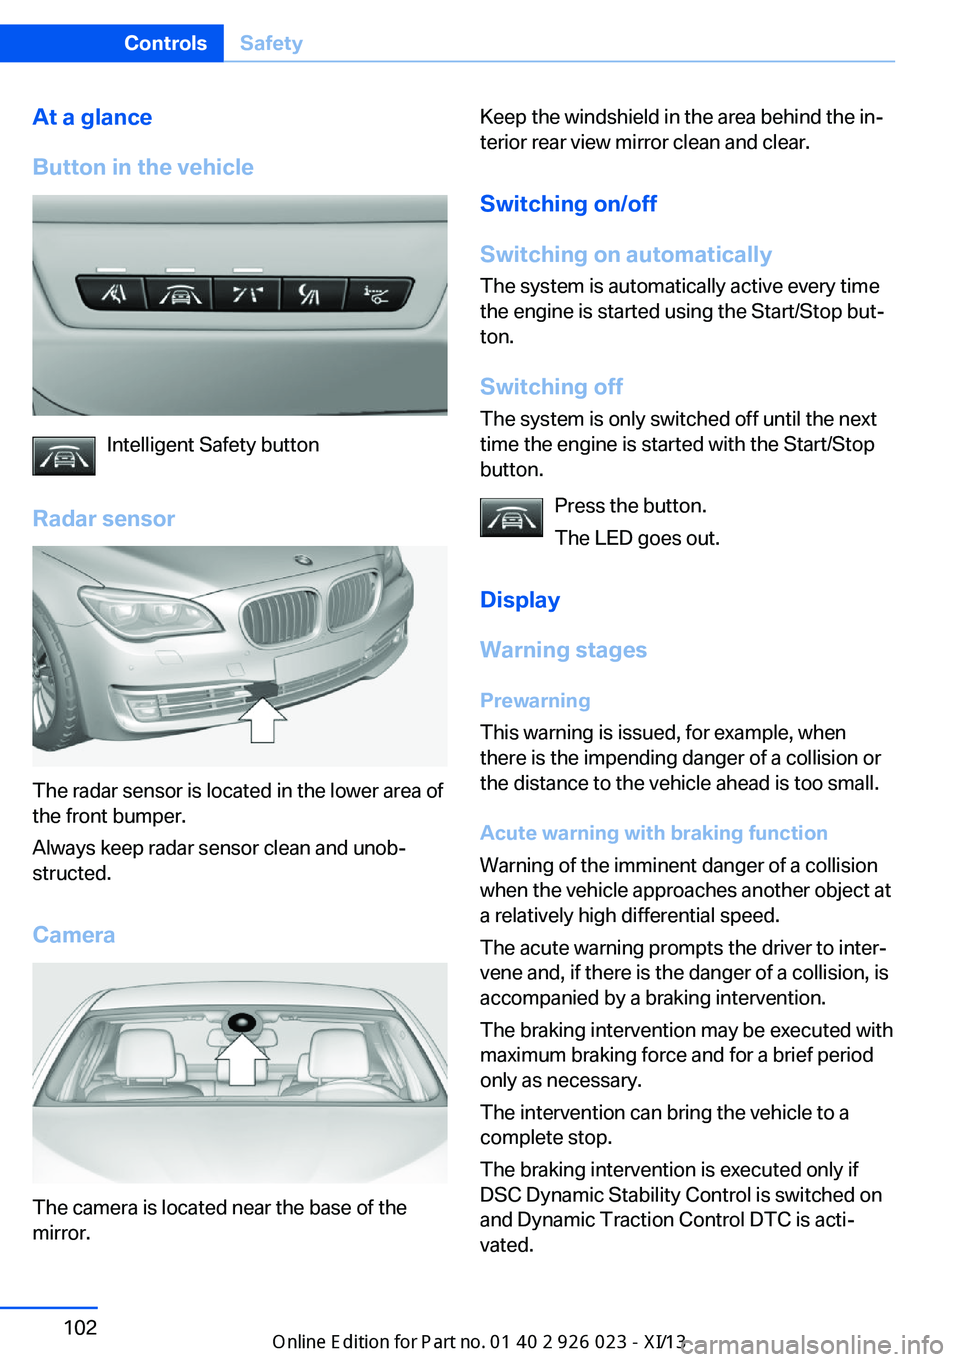 BMW 6 SERIES GRAN COUPE 2013 F12 Owners Guide At a glance
Button in the vehicle
Intelligent Safety button
Radar sensor
The radar sensor is located in the lower area of
the front bumper.
Always keep radar sensor clean and unob‐
structed.
Camera
